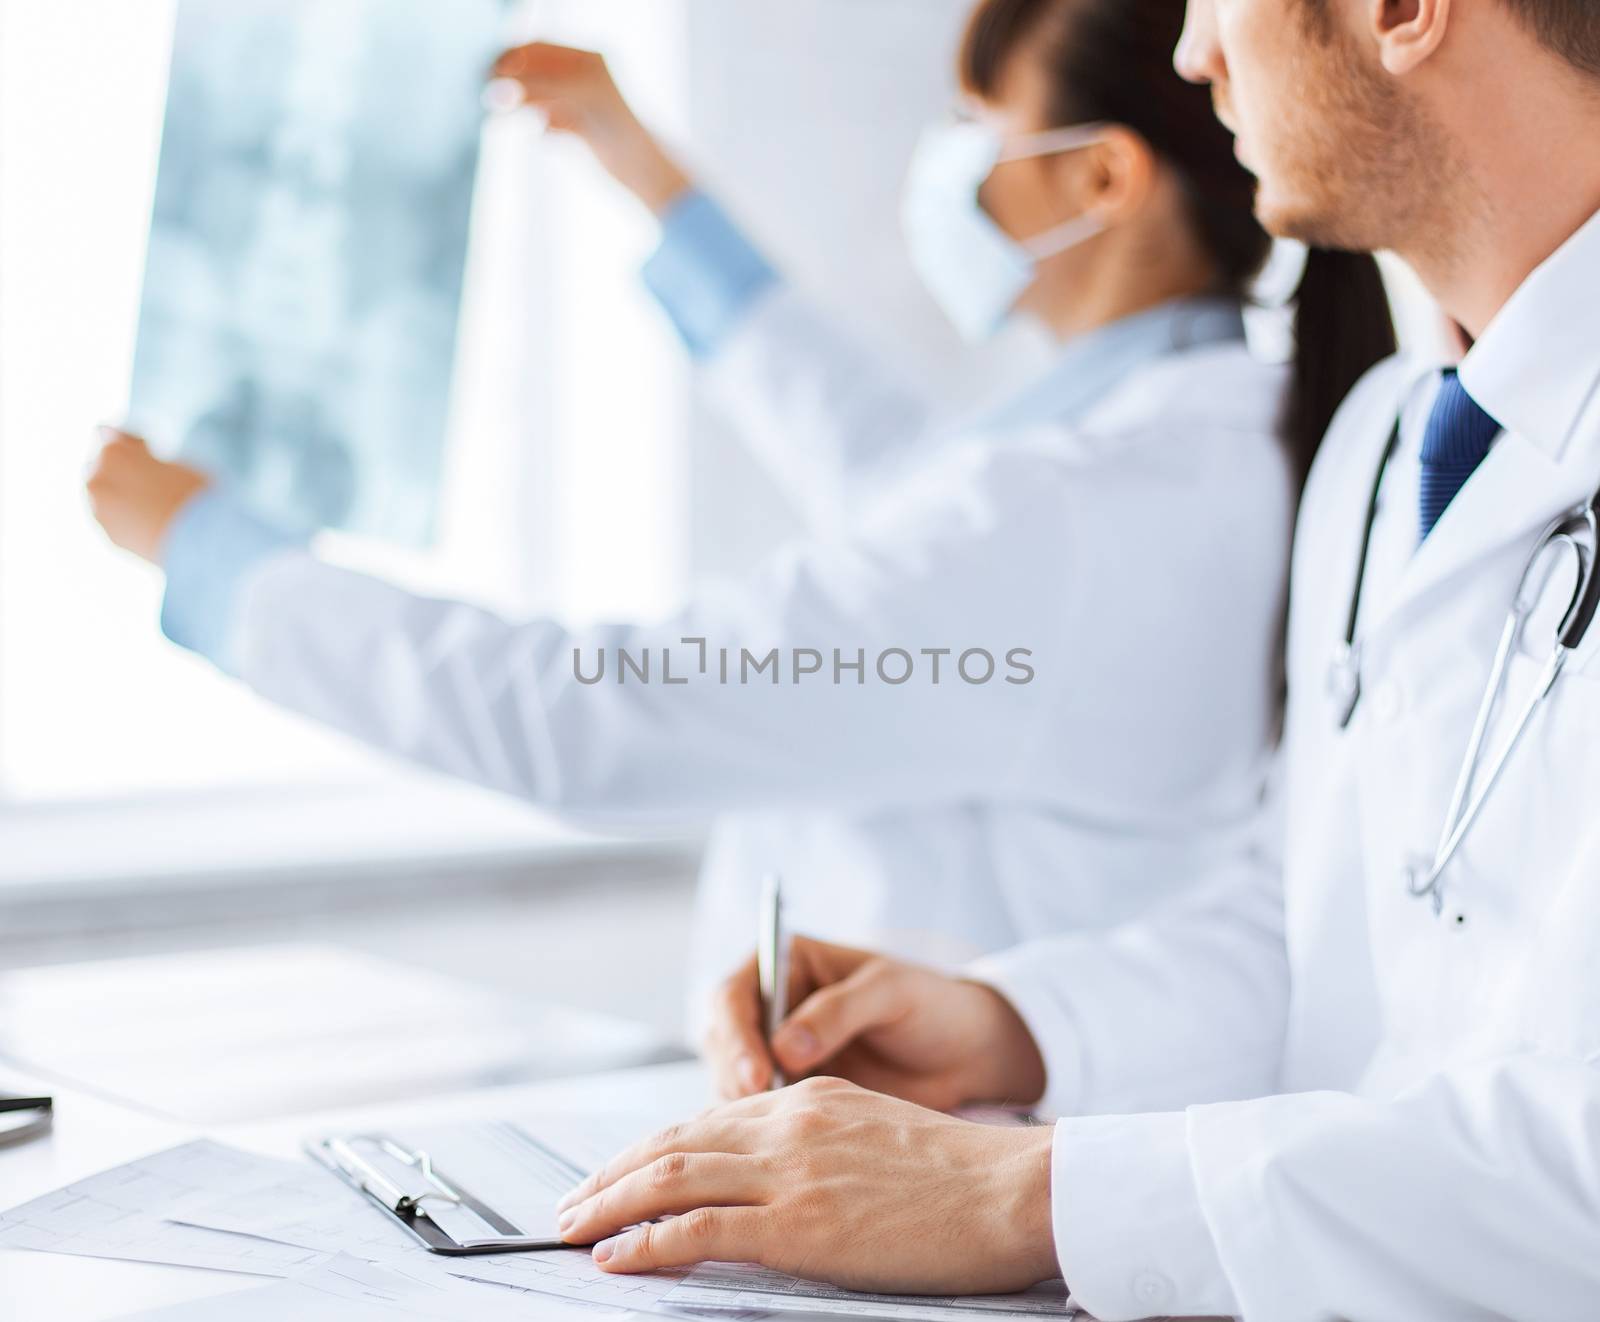 picture of doctor and nurse exploring x-ray